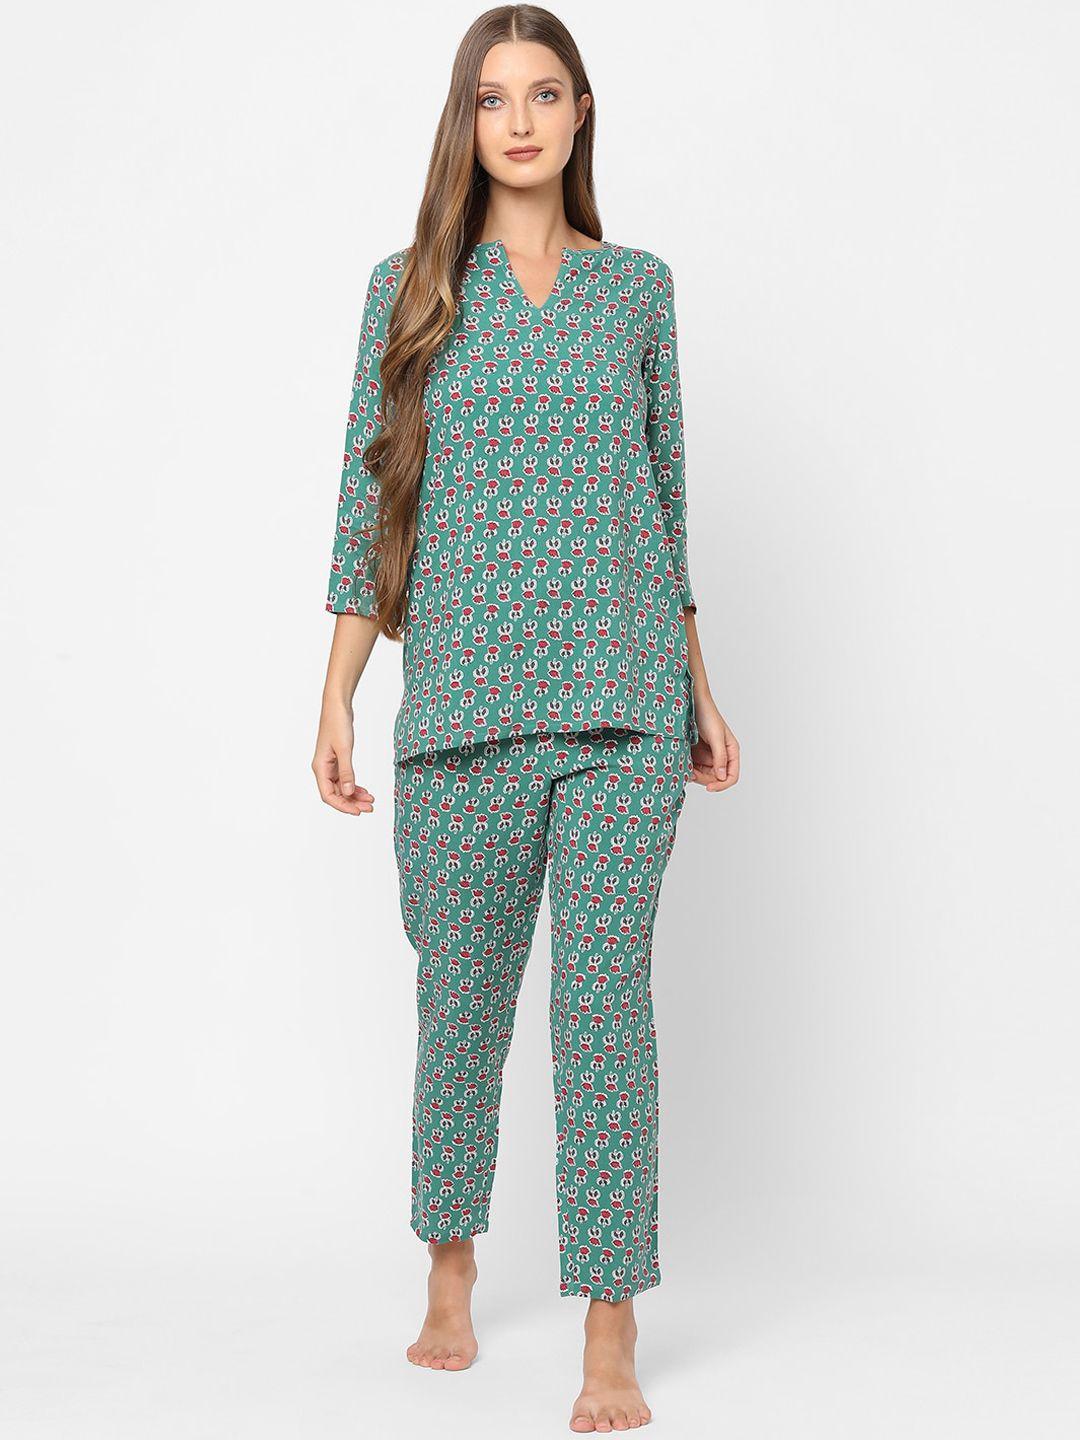 maysixty women green printed night suit